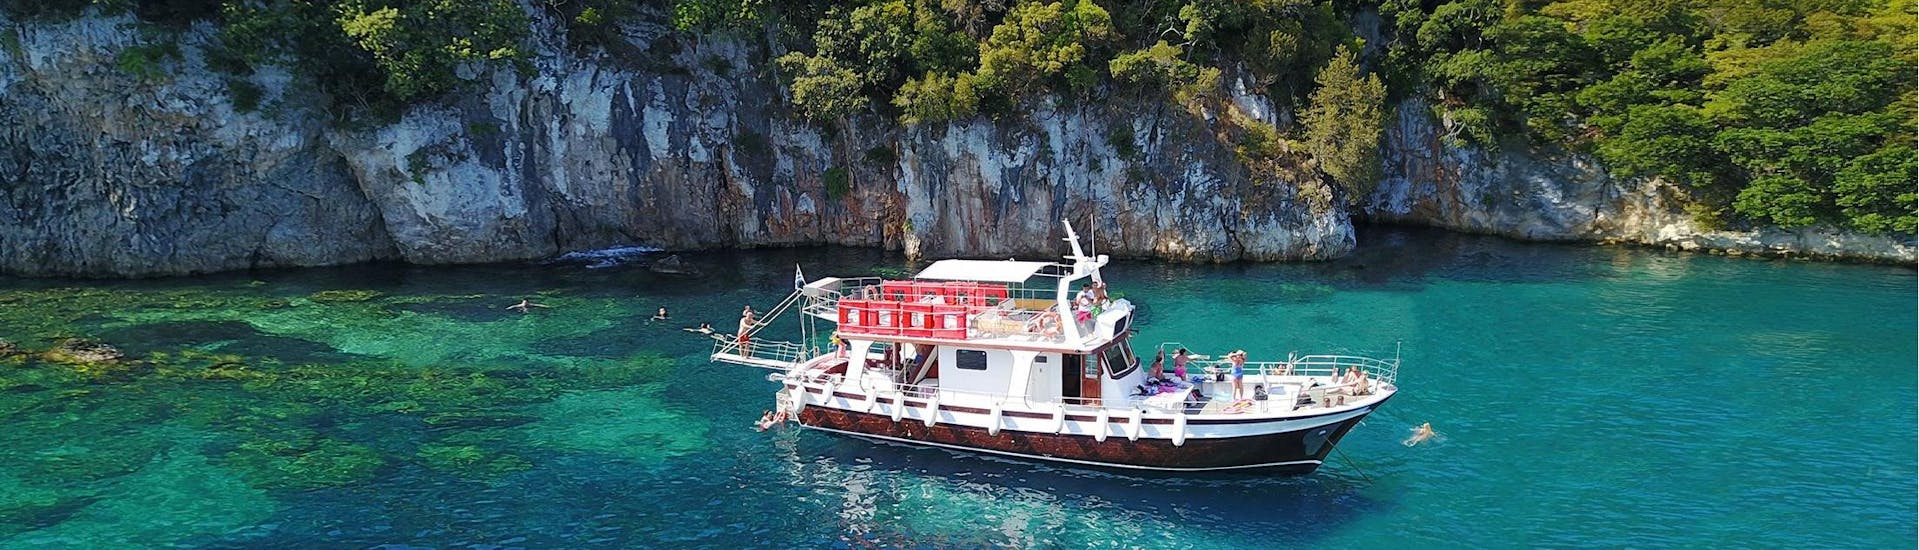 The modern wooden boat used for the Zephyros Milos boat trips is located in a bay with crystal clear waters in Milos.